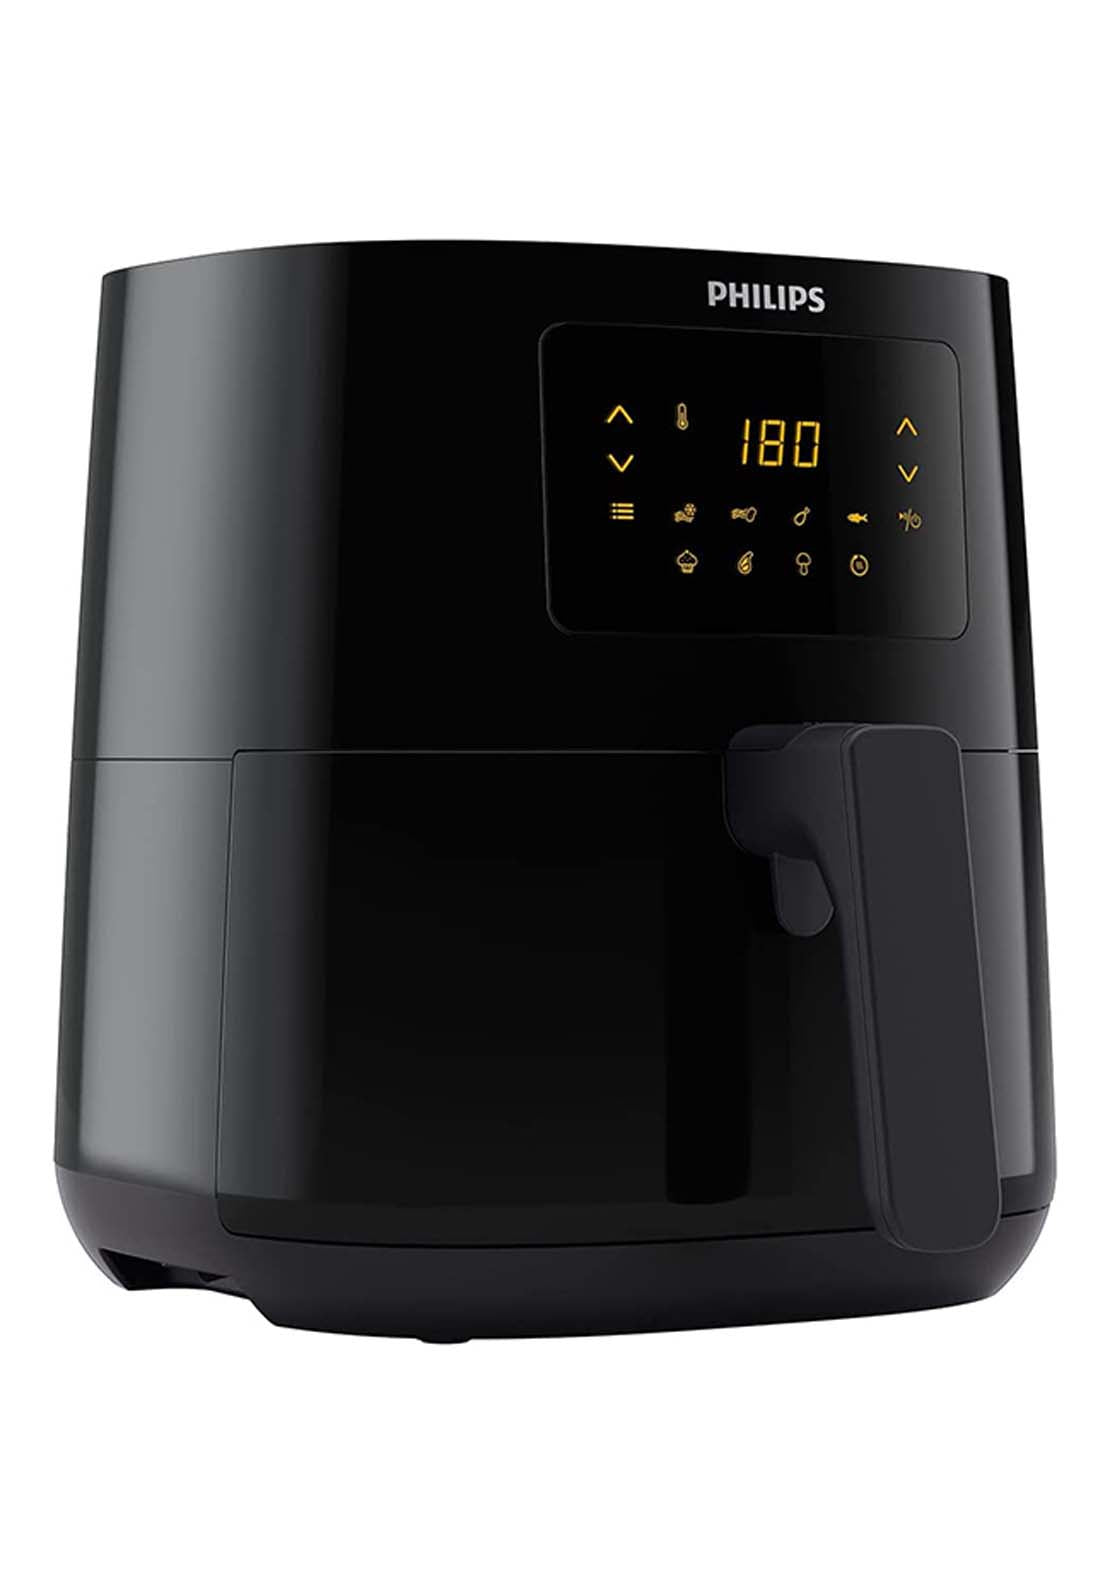 Philips 3000S Air Fryer 4L | Hd925291 2 Shaws Department Stores